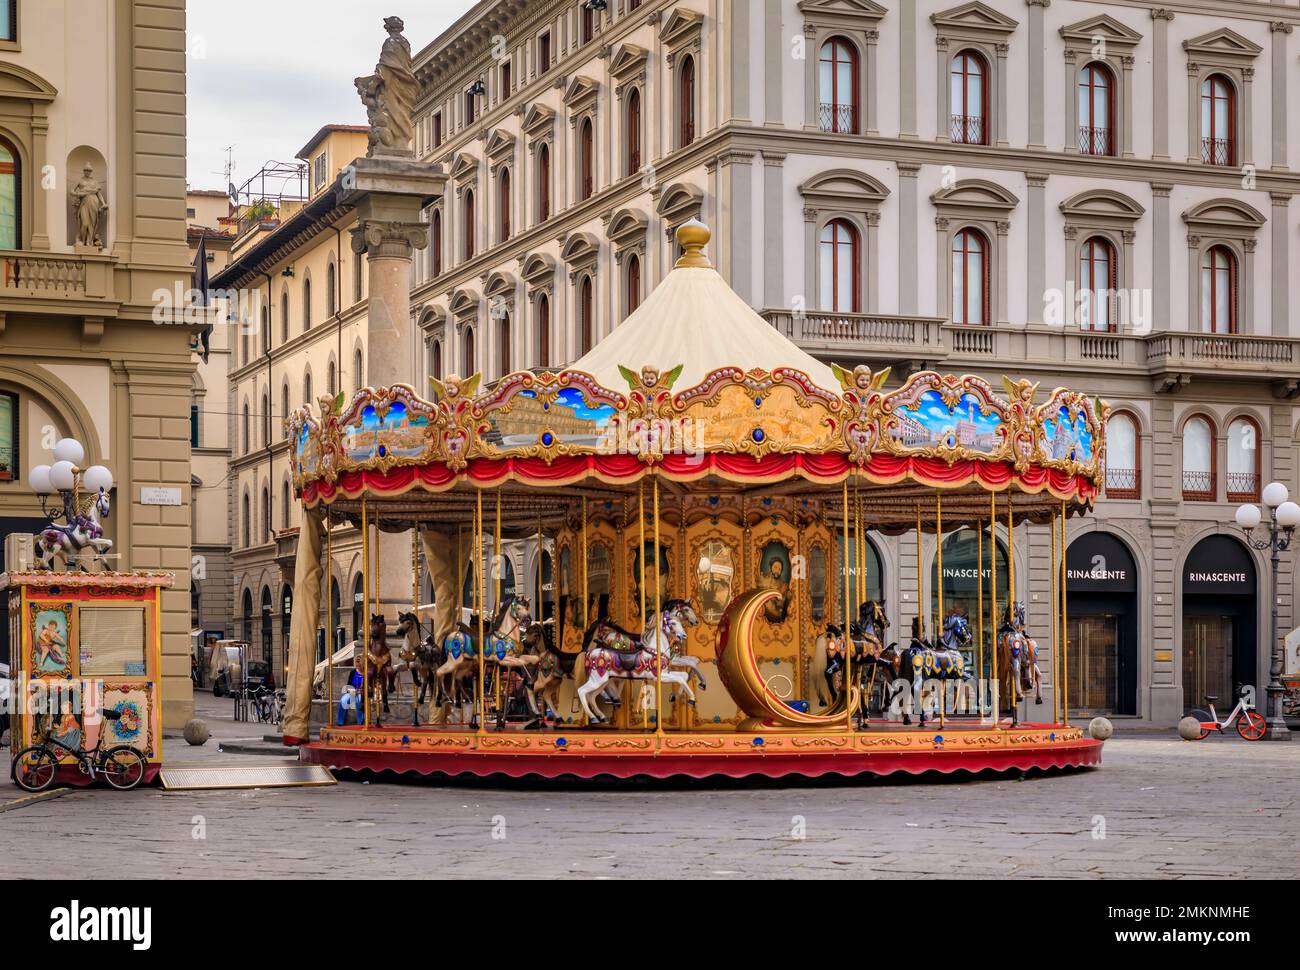 Florence, Italy - June 04, 2022: Ornate antique carousel with wooden horses on Piazza della Republica during the day Stock Photo